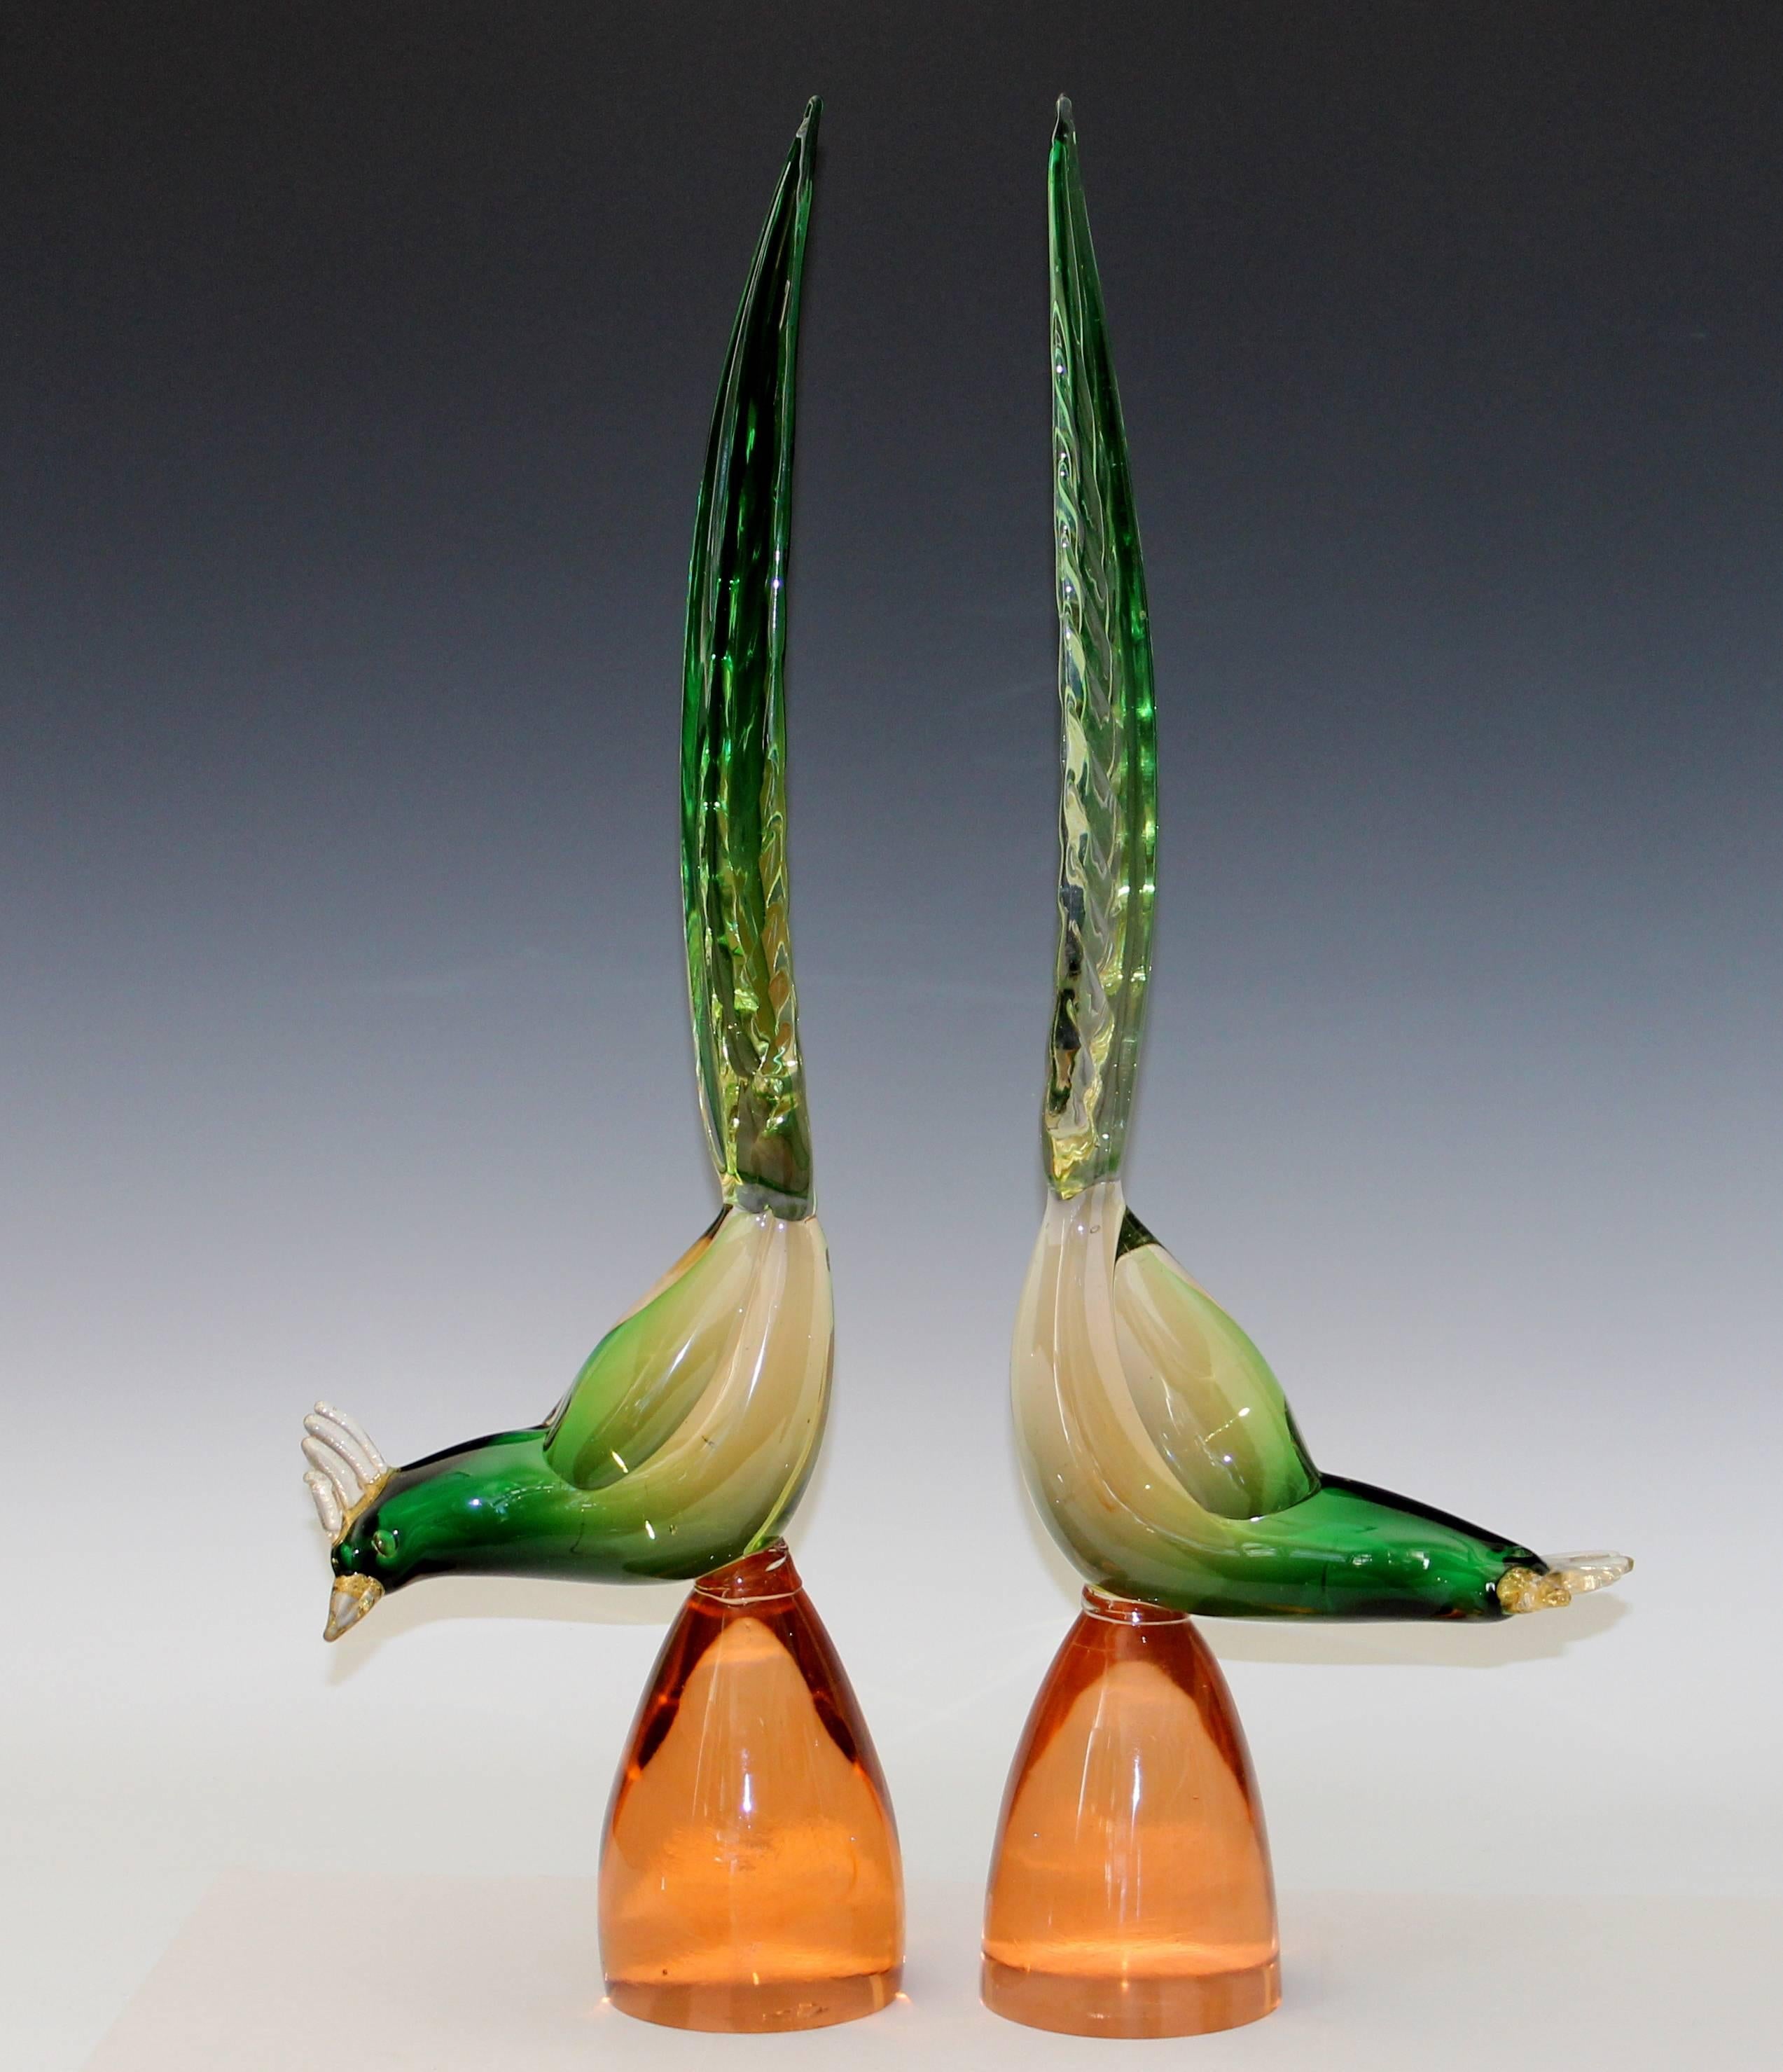 True pair of large Murano glass pheasants, circa 1970s. The birds are green and clear glass shot with gold flecks in the tails and combes. 26